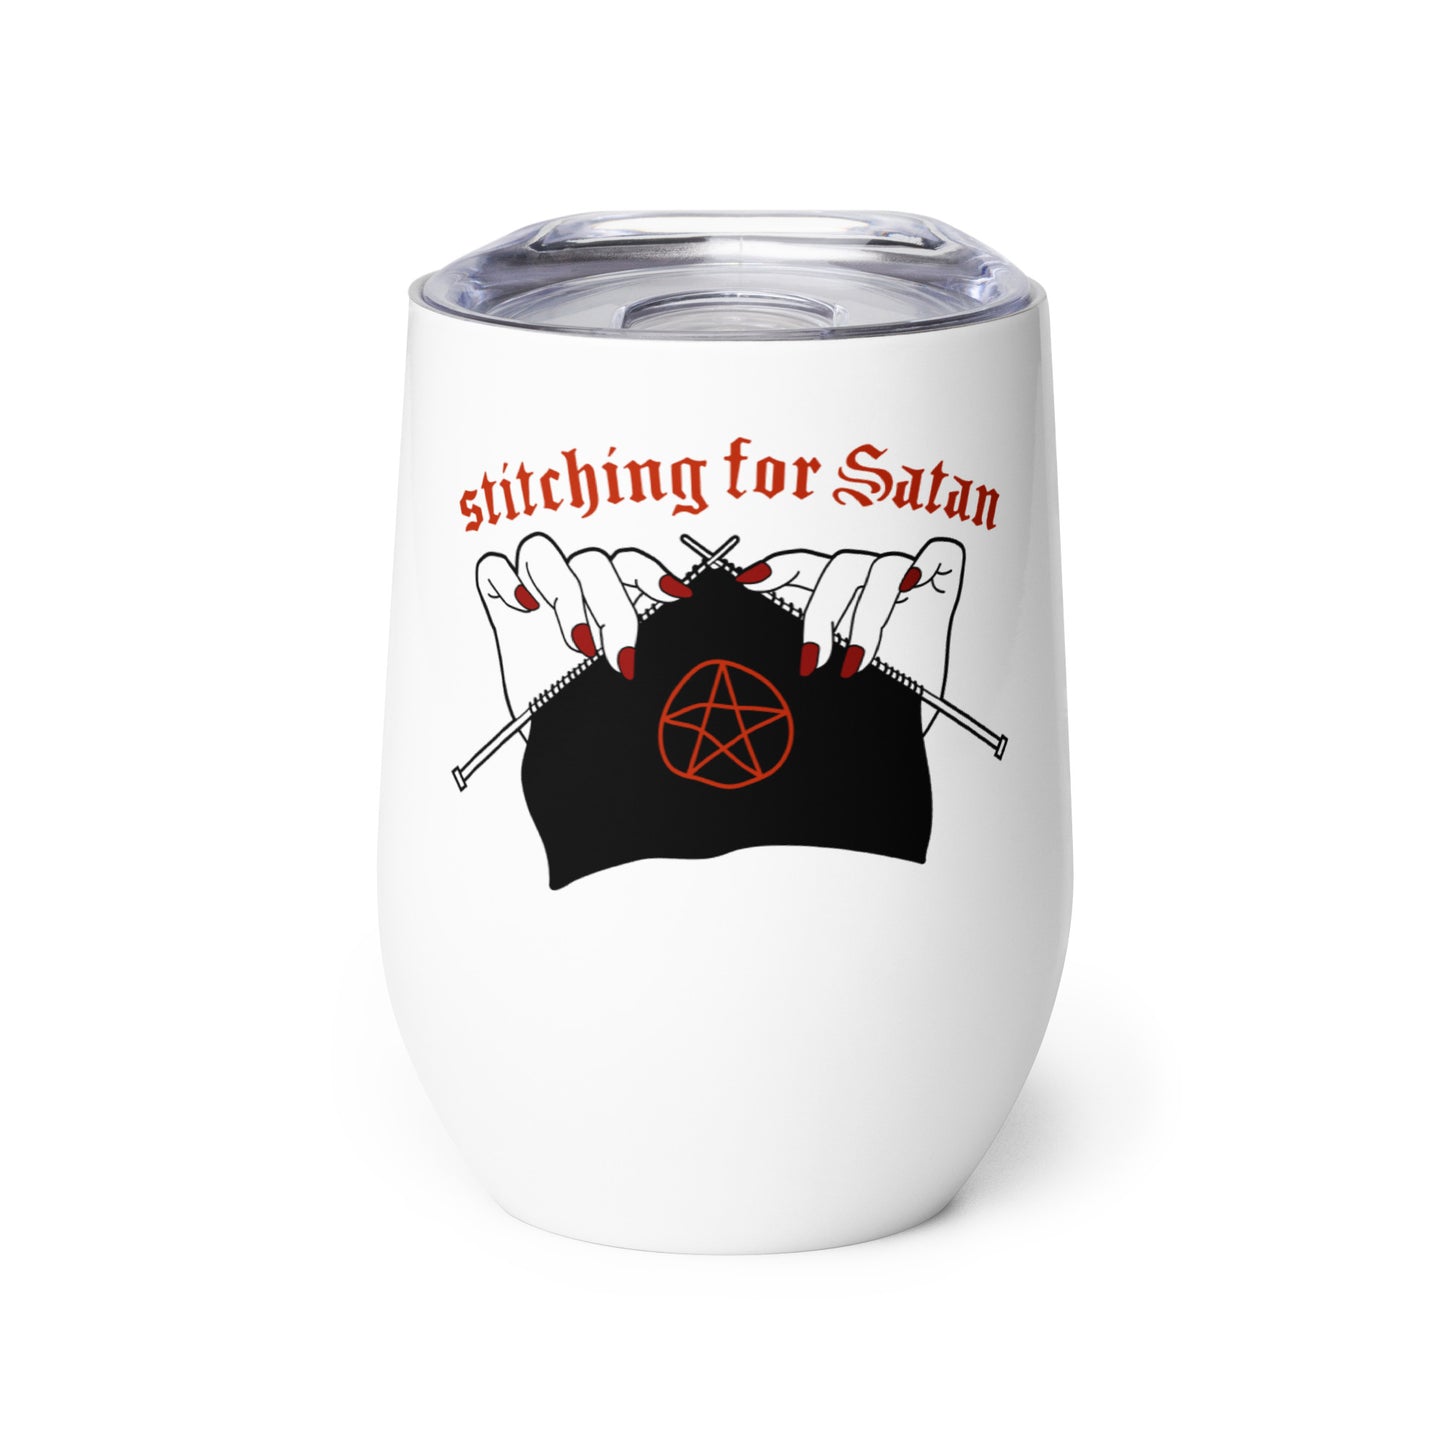 A white 12 ounce wine tumbler with a clear plastic lid. The tumbler is decorated with an illustration of pale white hands with painted red nails holding knitting needles. Black fabric on the needles features a red pentagram, and text above the hands reads "stitching for Satan" in a gothic red font.